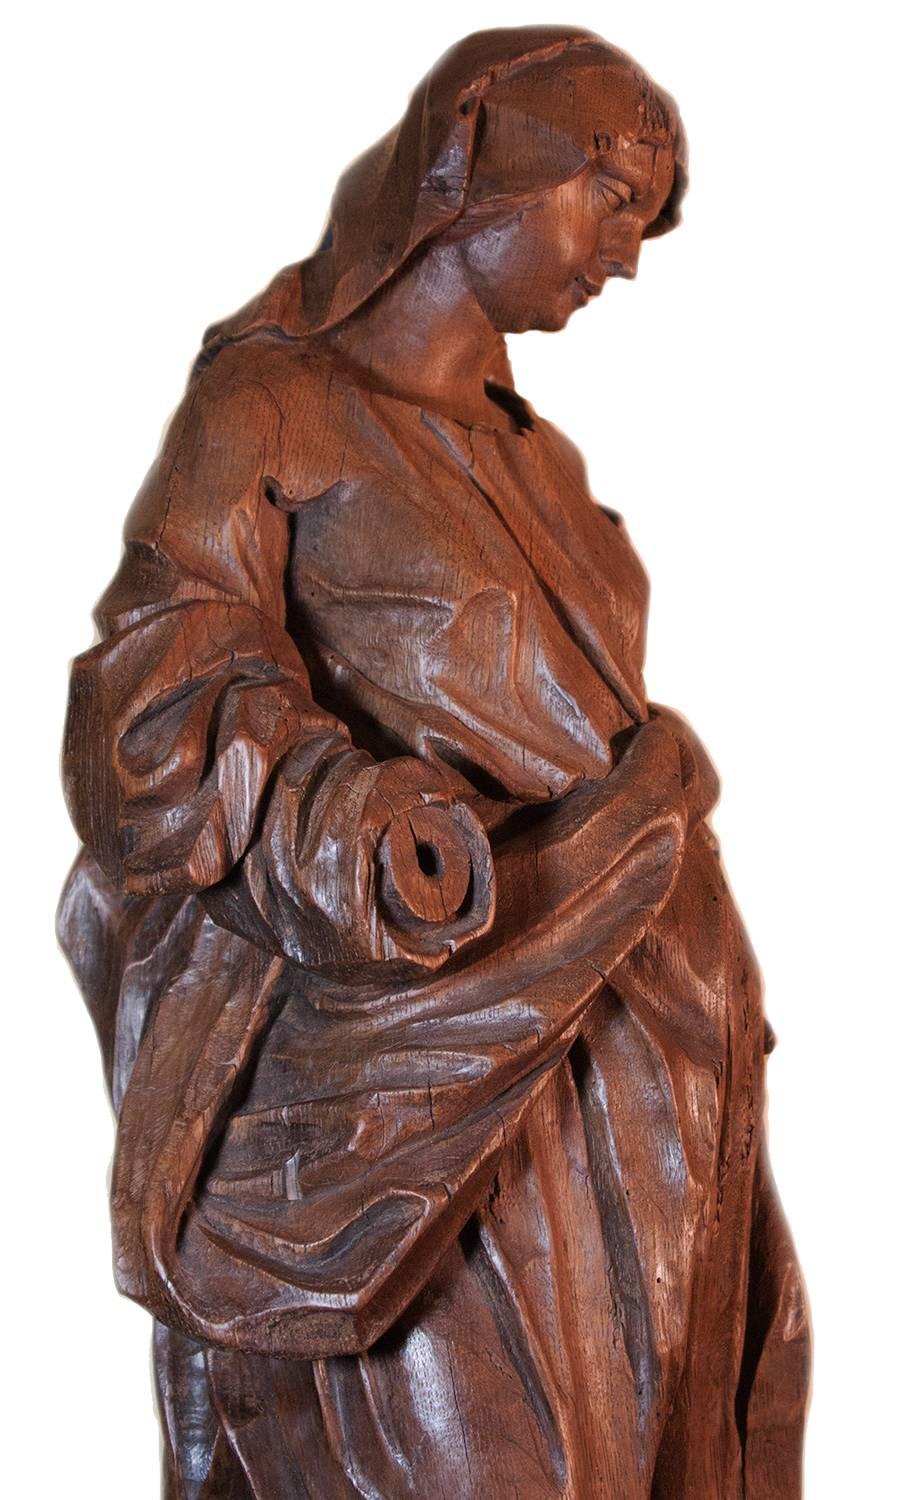 Pair Of Allegorical Figures In Oak, Circa 1730 - Brown Figurative Sculpture by Unknown